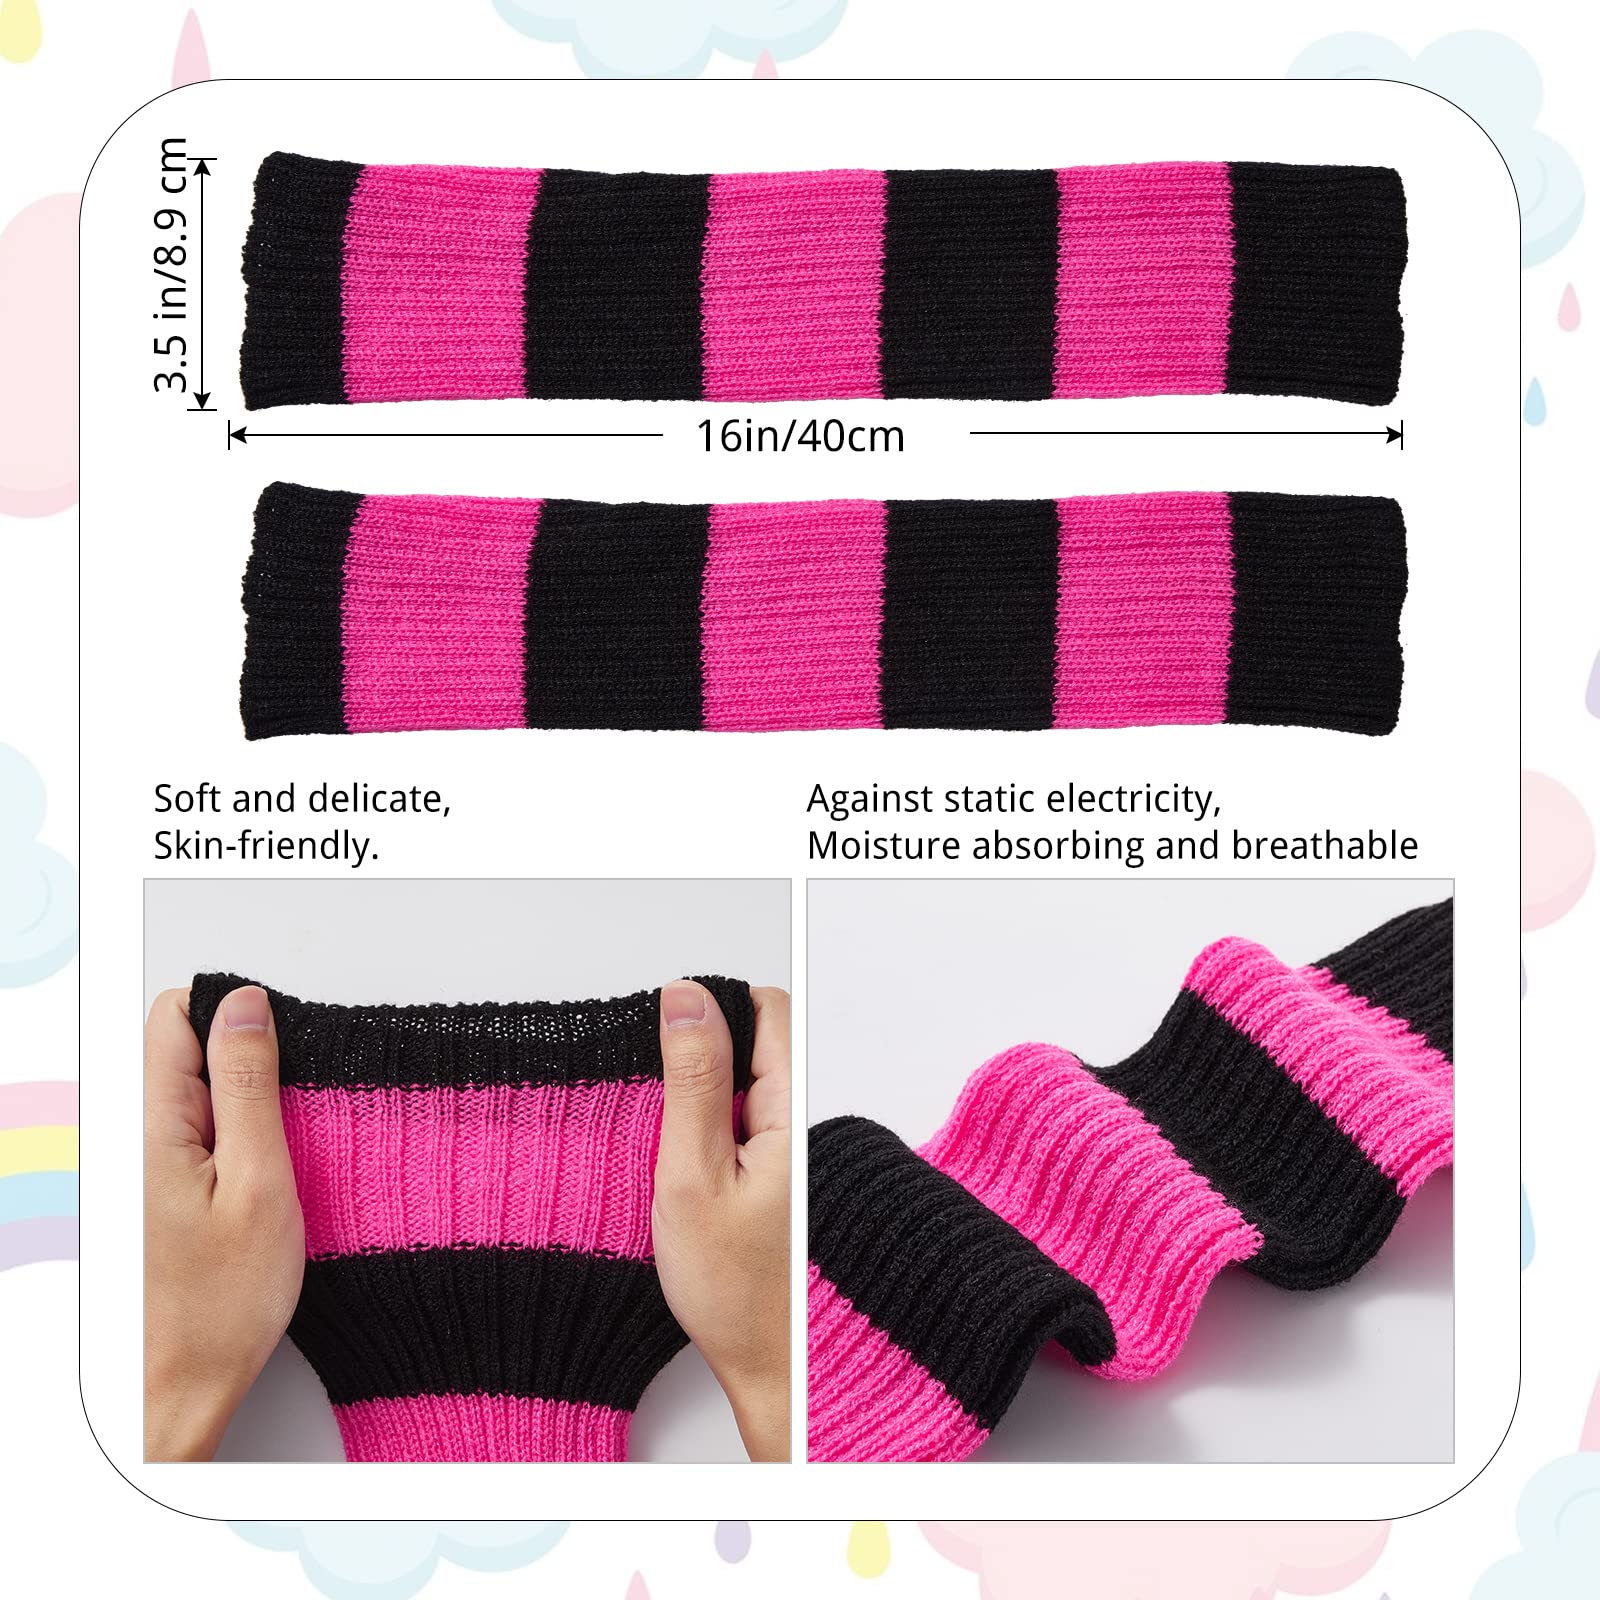 Womens Leg Warmers Neon Knitted for 80s Party Sports Yoga-Black & Bubble Gum Pink - Moon Wood